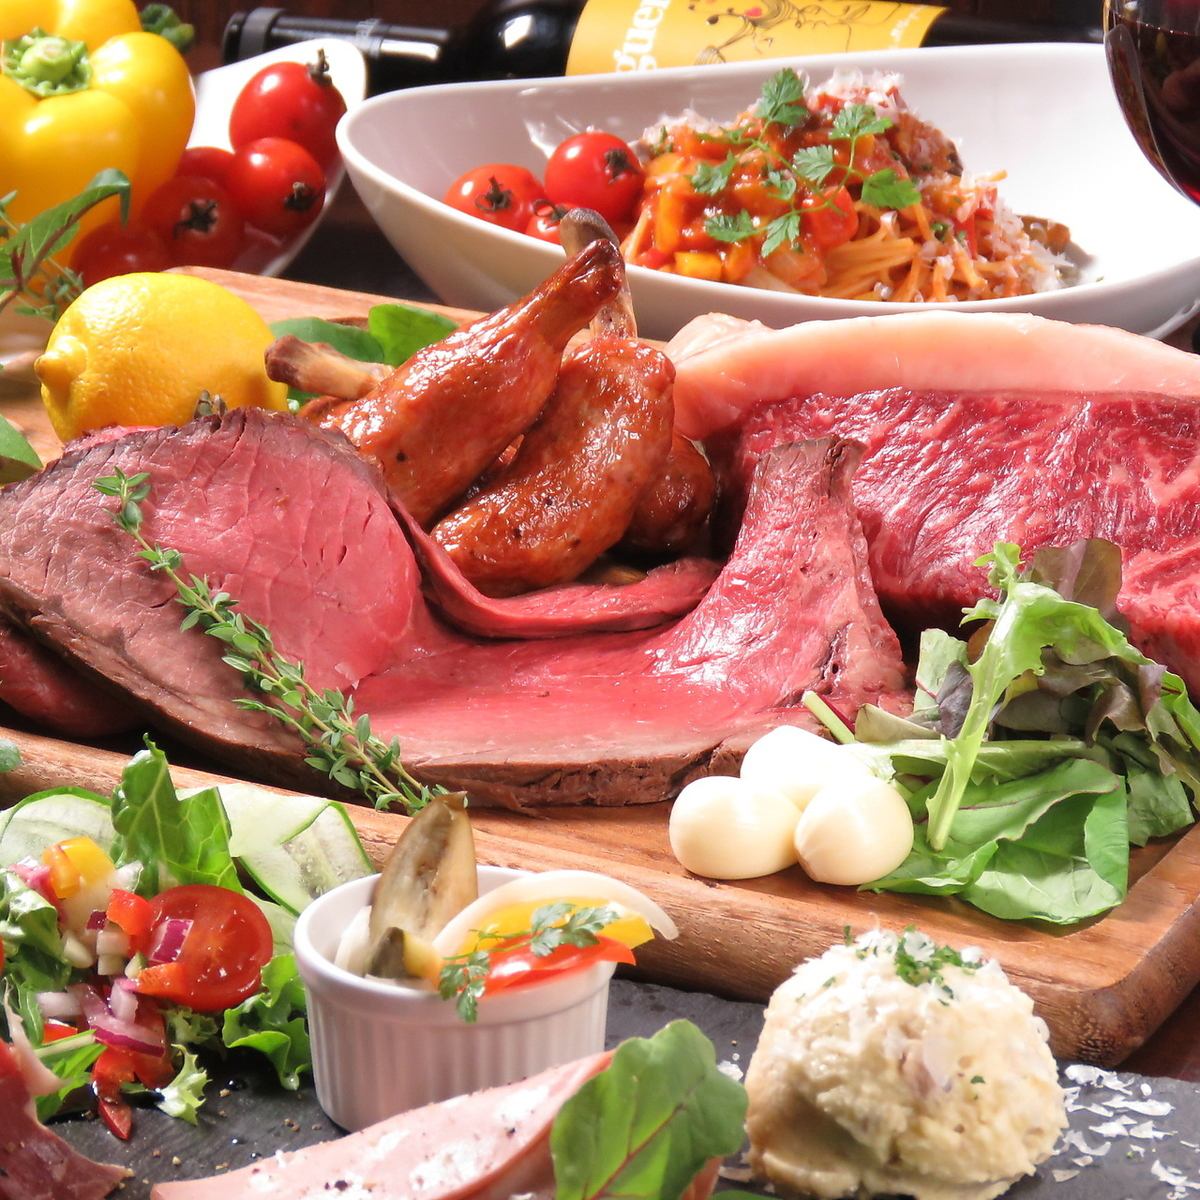 [Lunch banquet is a great deal♪] Lunch banquet! 3 hours all-you-can-eat and drink from 2,480 yen